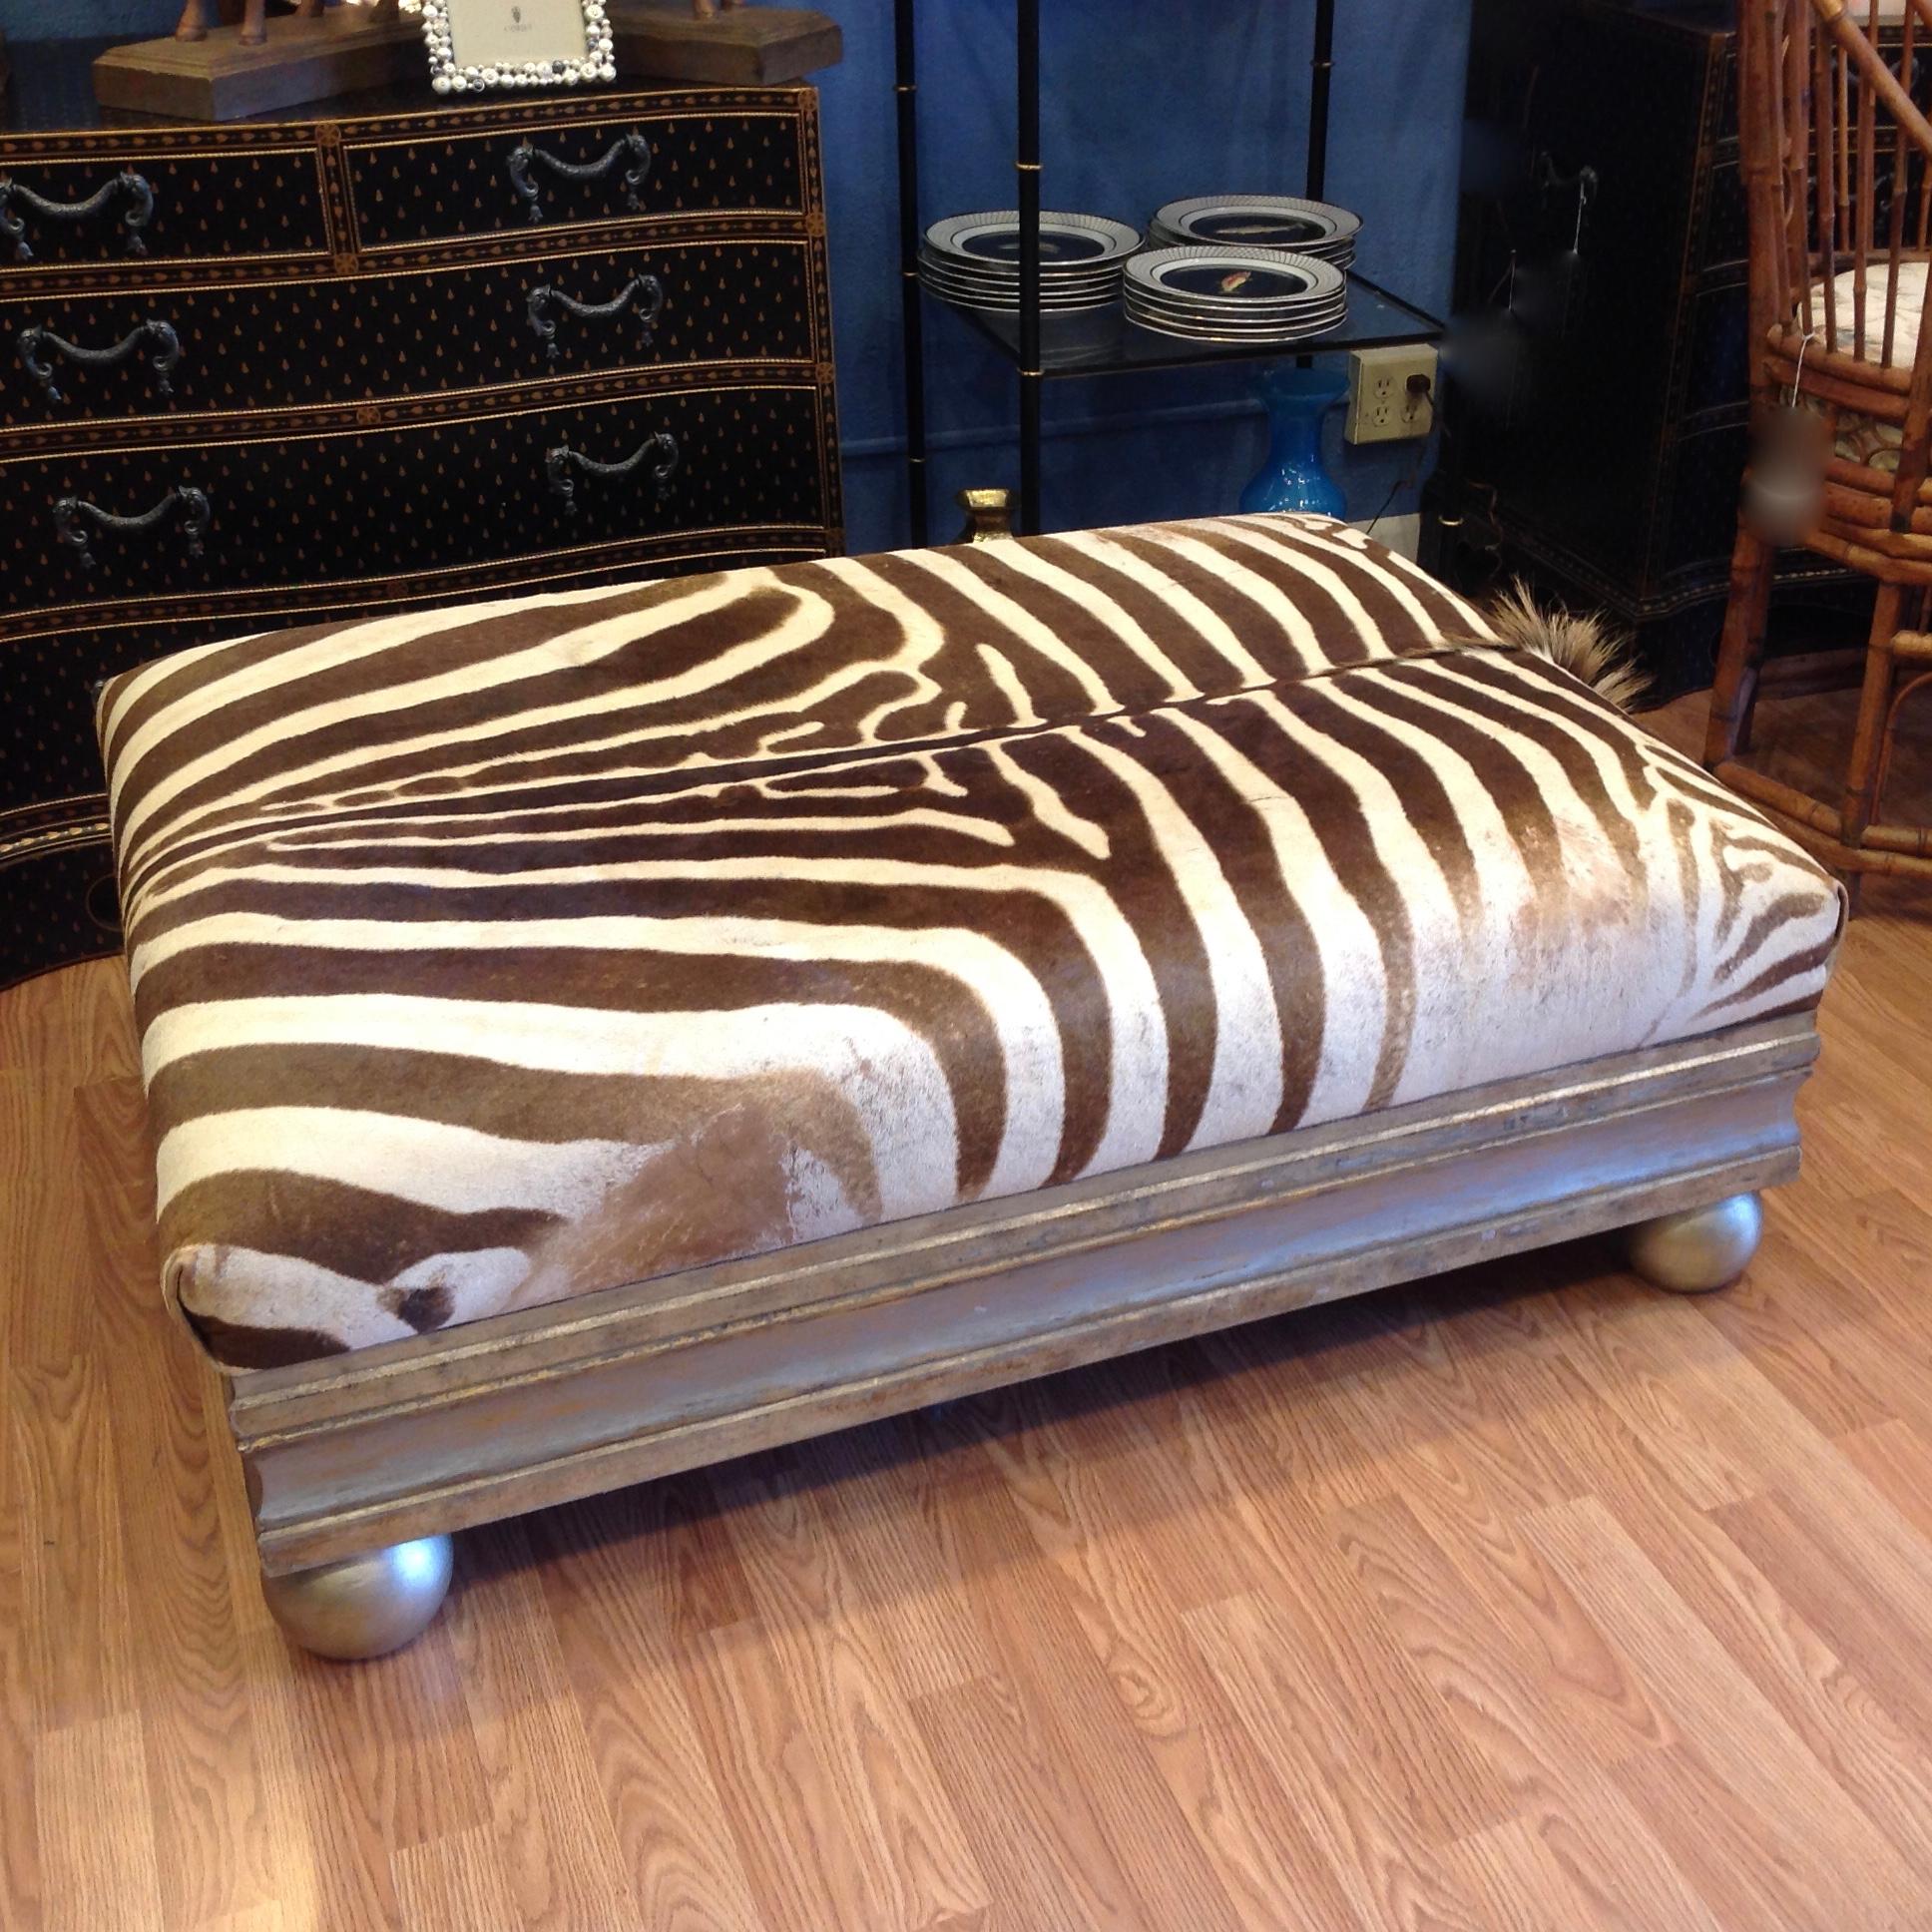 Fashioned from a complete hide sporting its mane. 
The ottoman is cocktail table height and is supported by a silver gilt wood 
trimmed base terminating in ball feet.